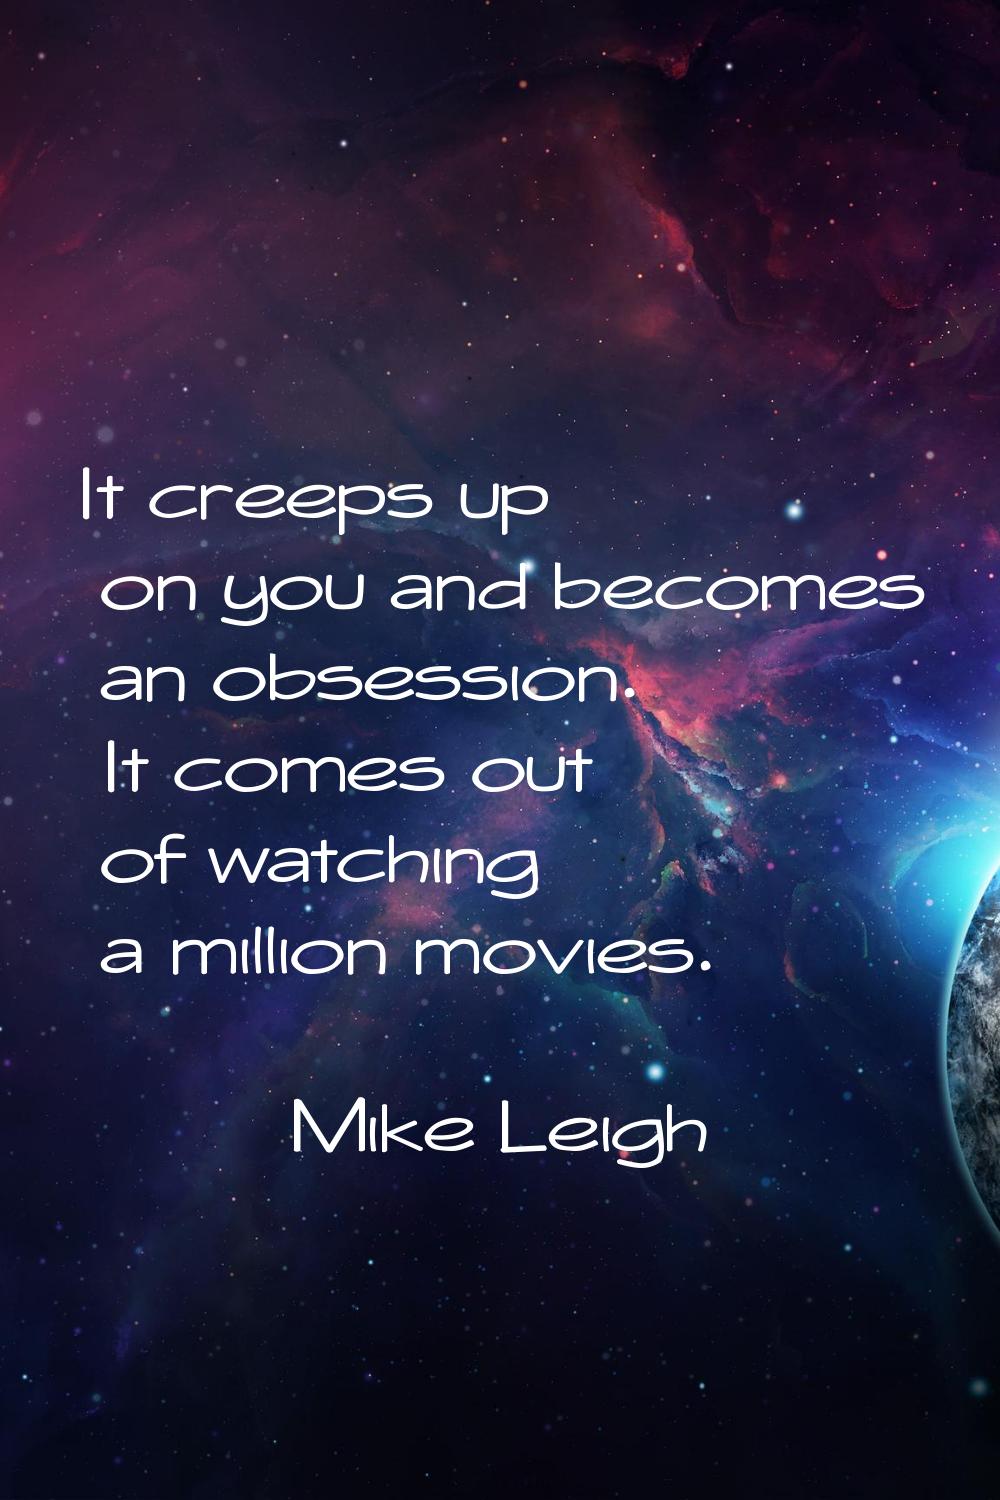 It creeps up on you and becomes an obsession. It comes out of watching a million movies.